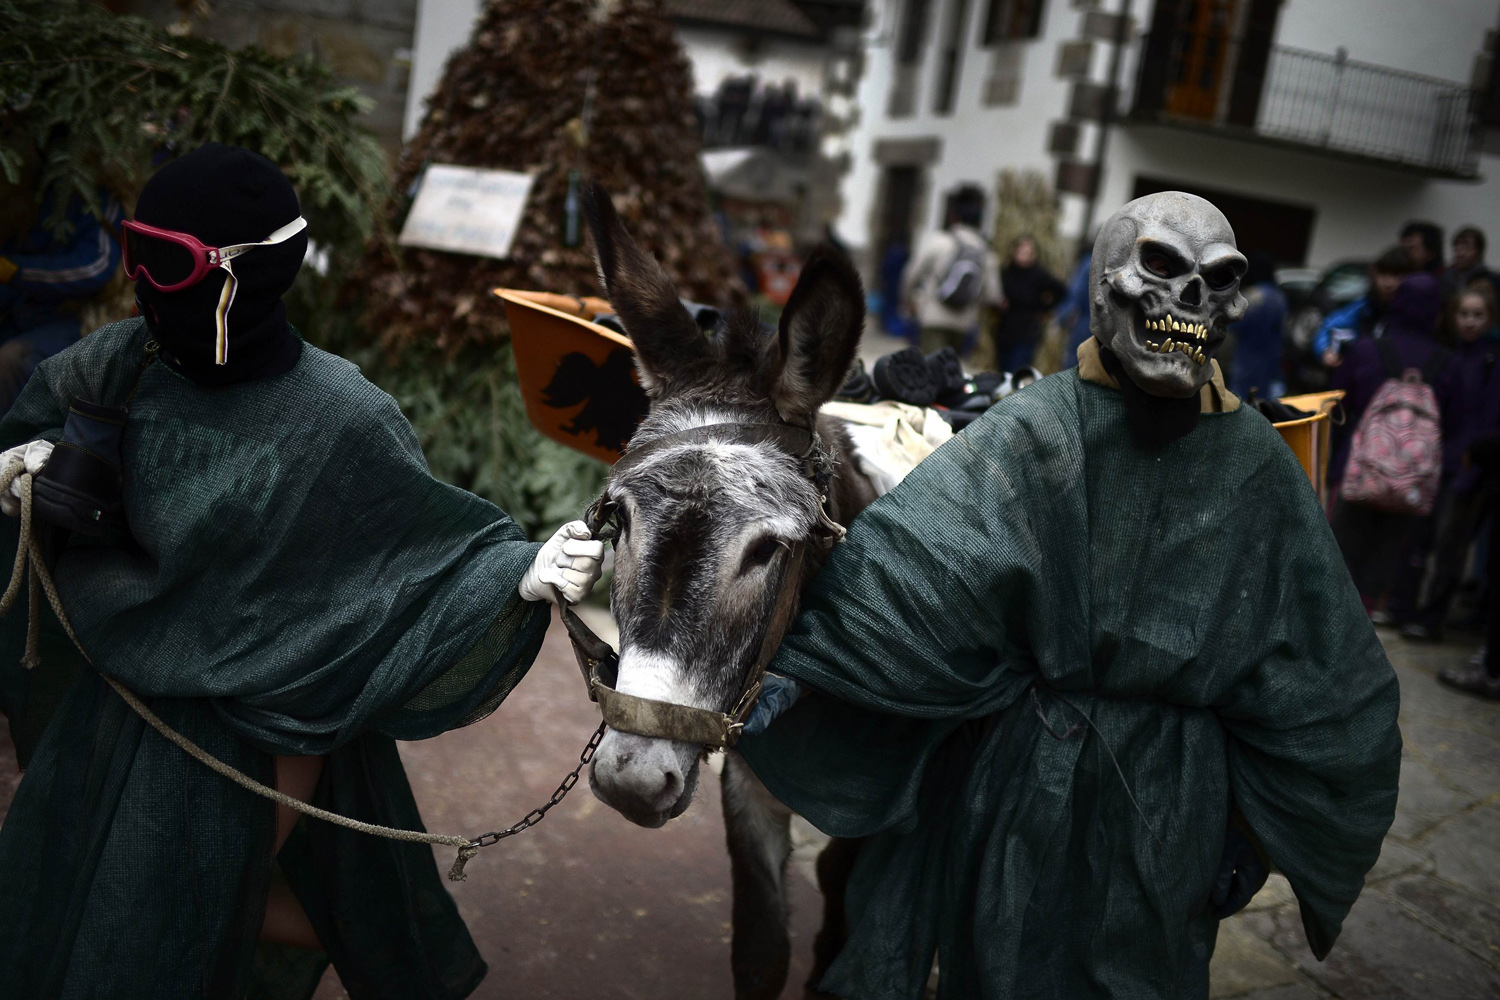 Masked men lead a donkey through the streets during carnival celebrations in Zubieta